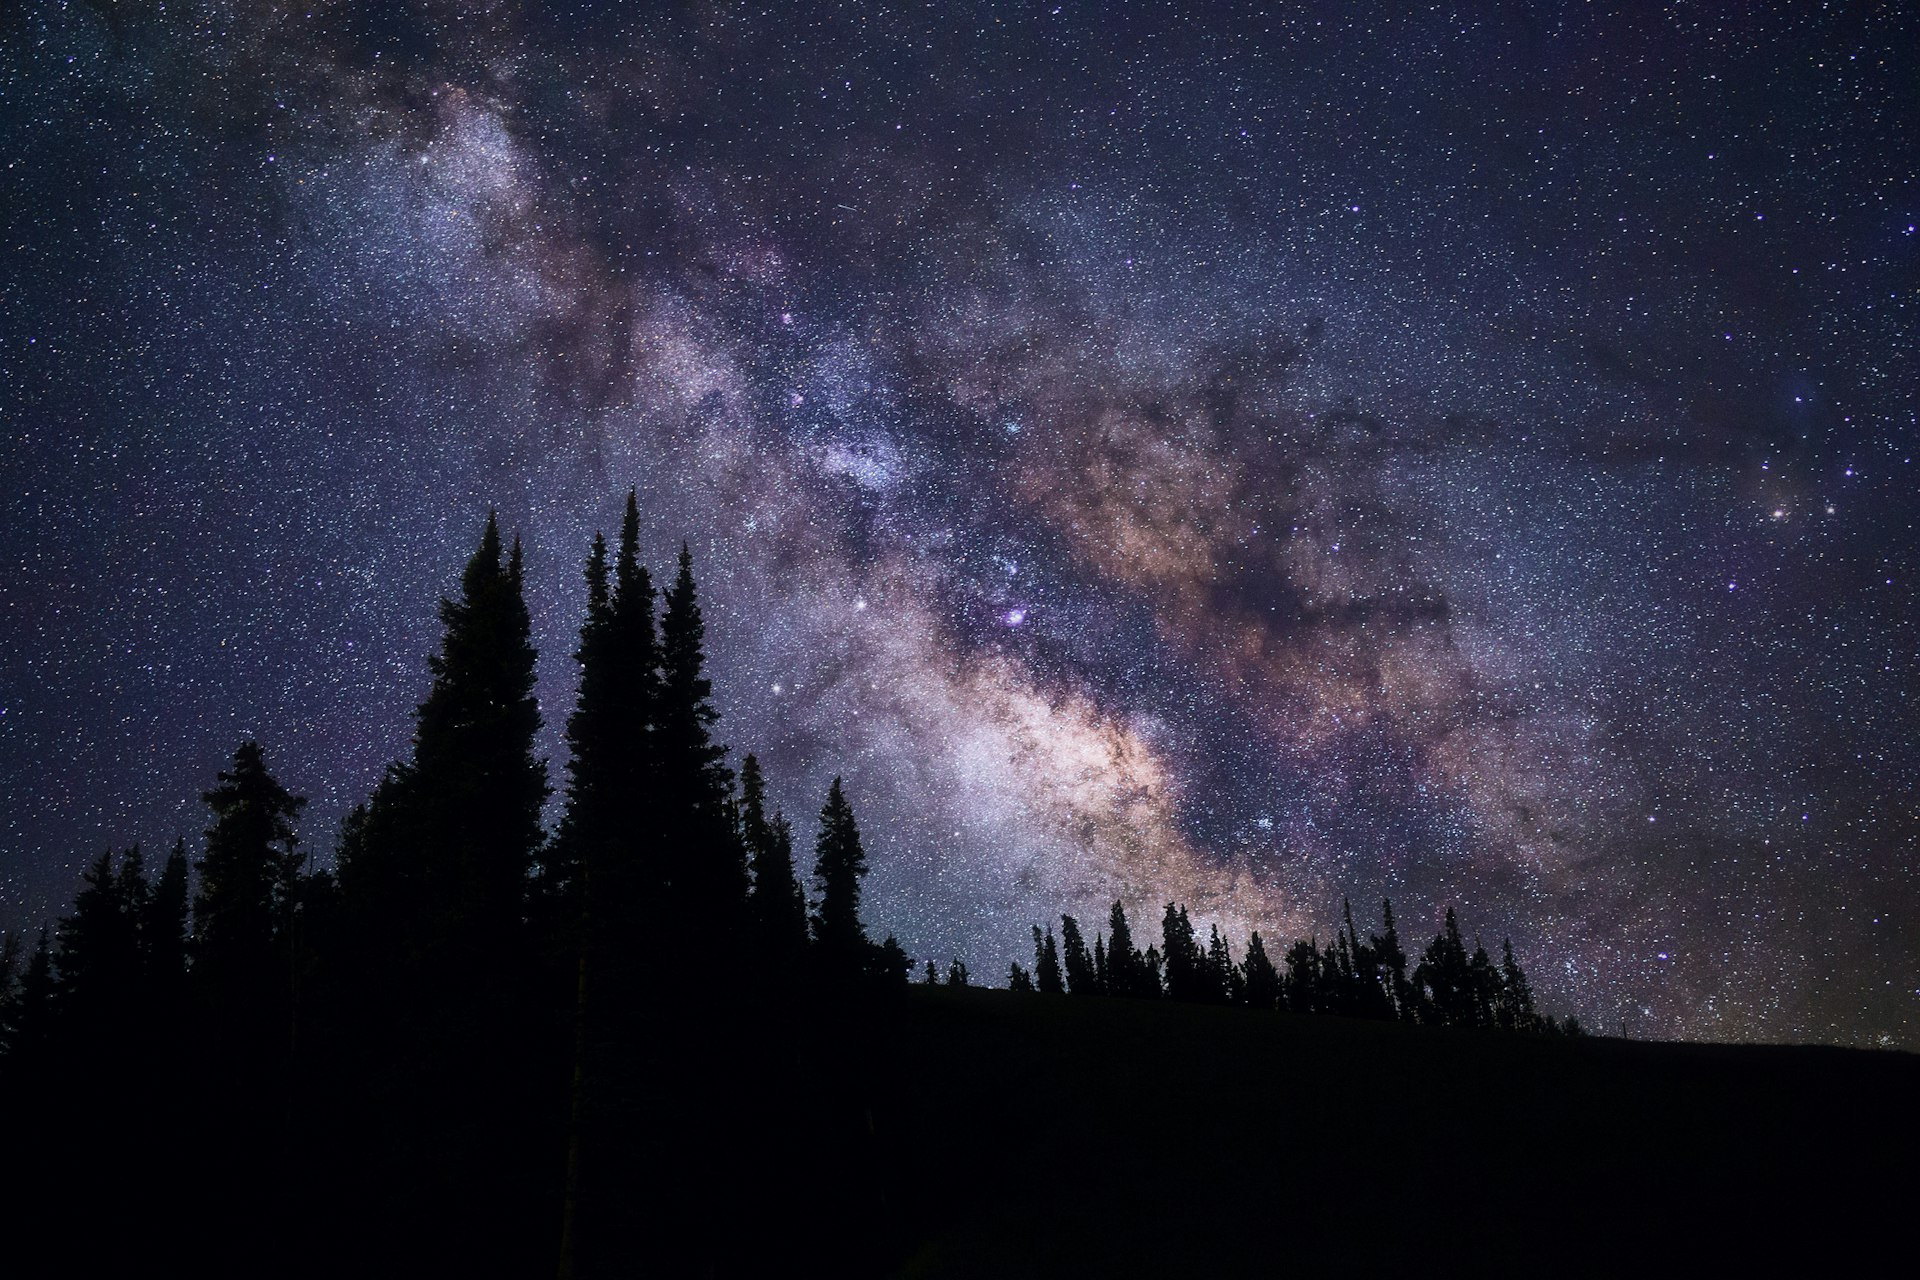 Towering conifers are contrasted in deep black against a star-strewn blue and purple sky with a clear view of the arm of the Milky Way in the center of the frame